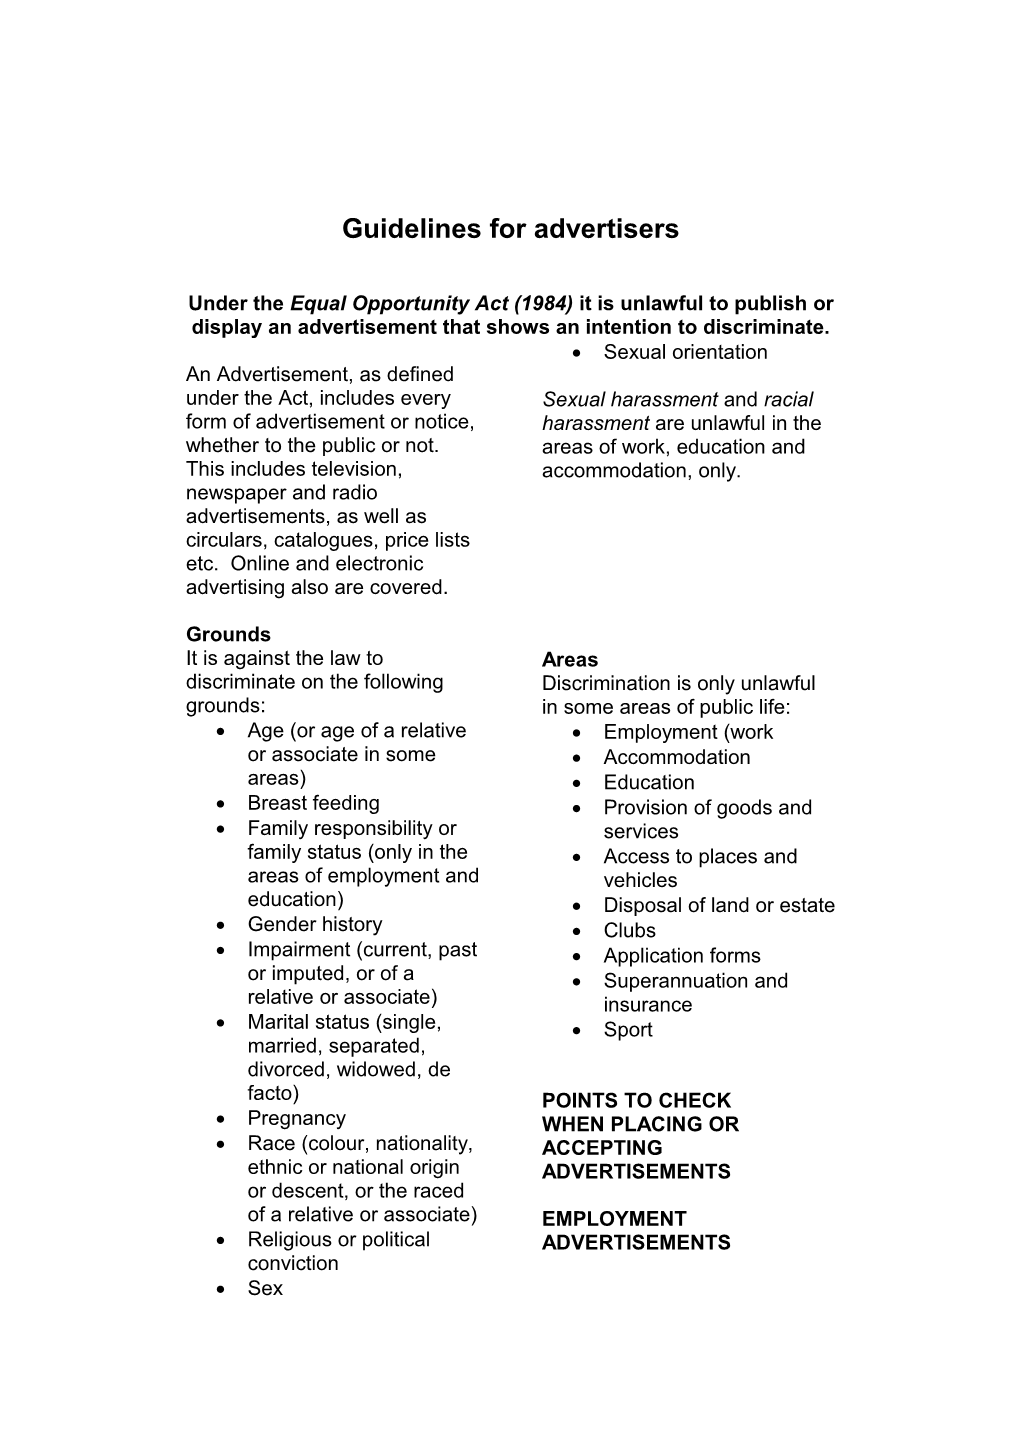 Guidelines for Advertisers